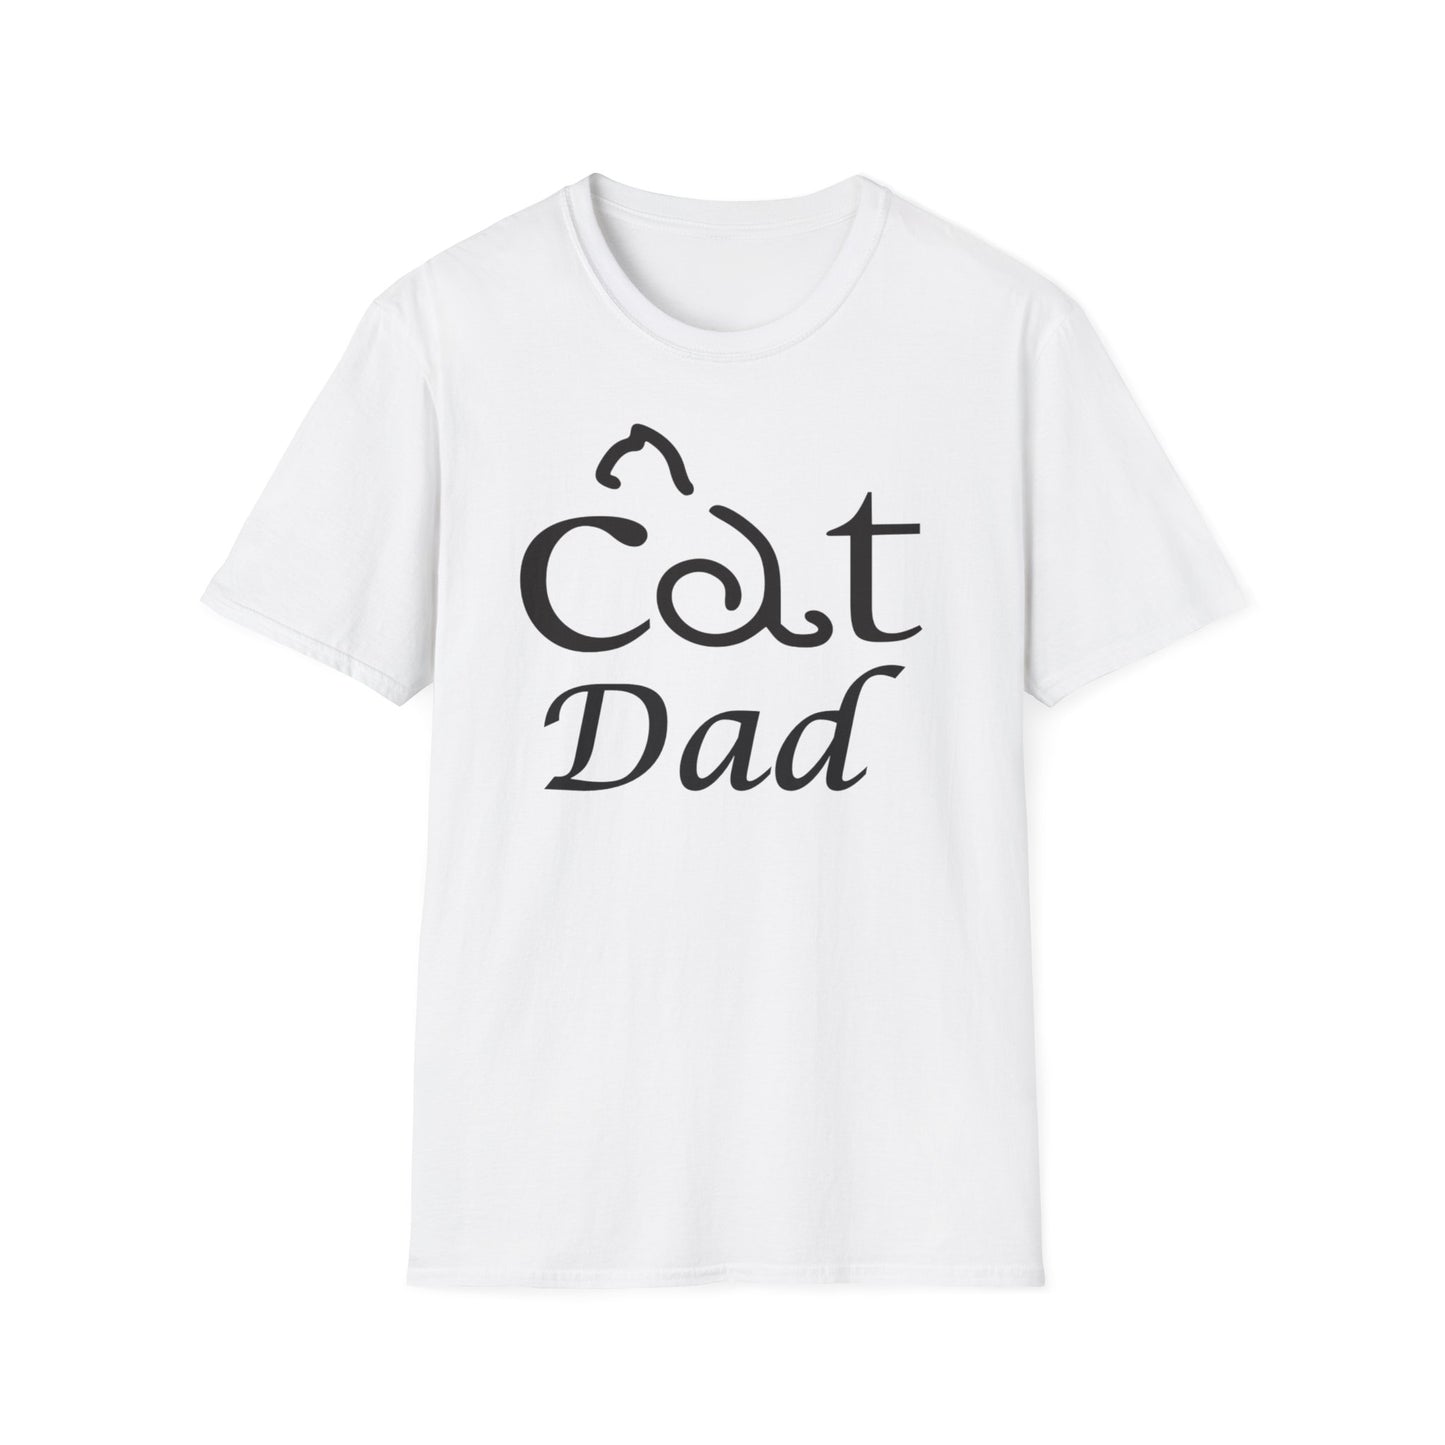 A white t-shirt with a design of a the words cat dad. The word cat has a cat shape made from the letter a.